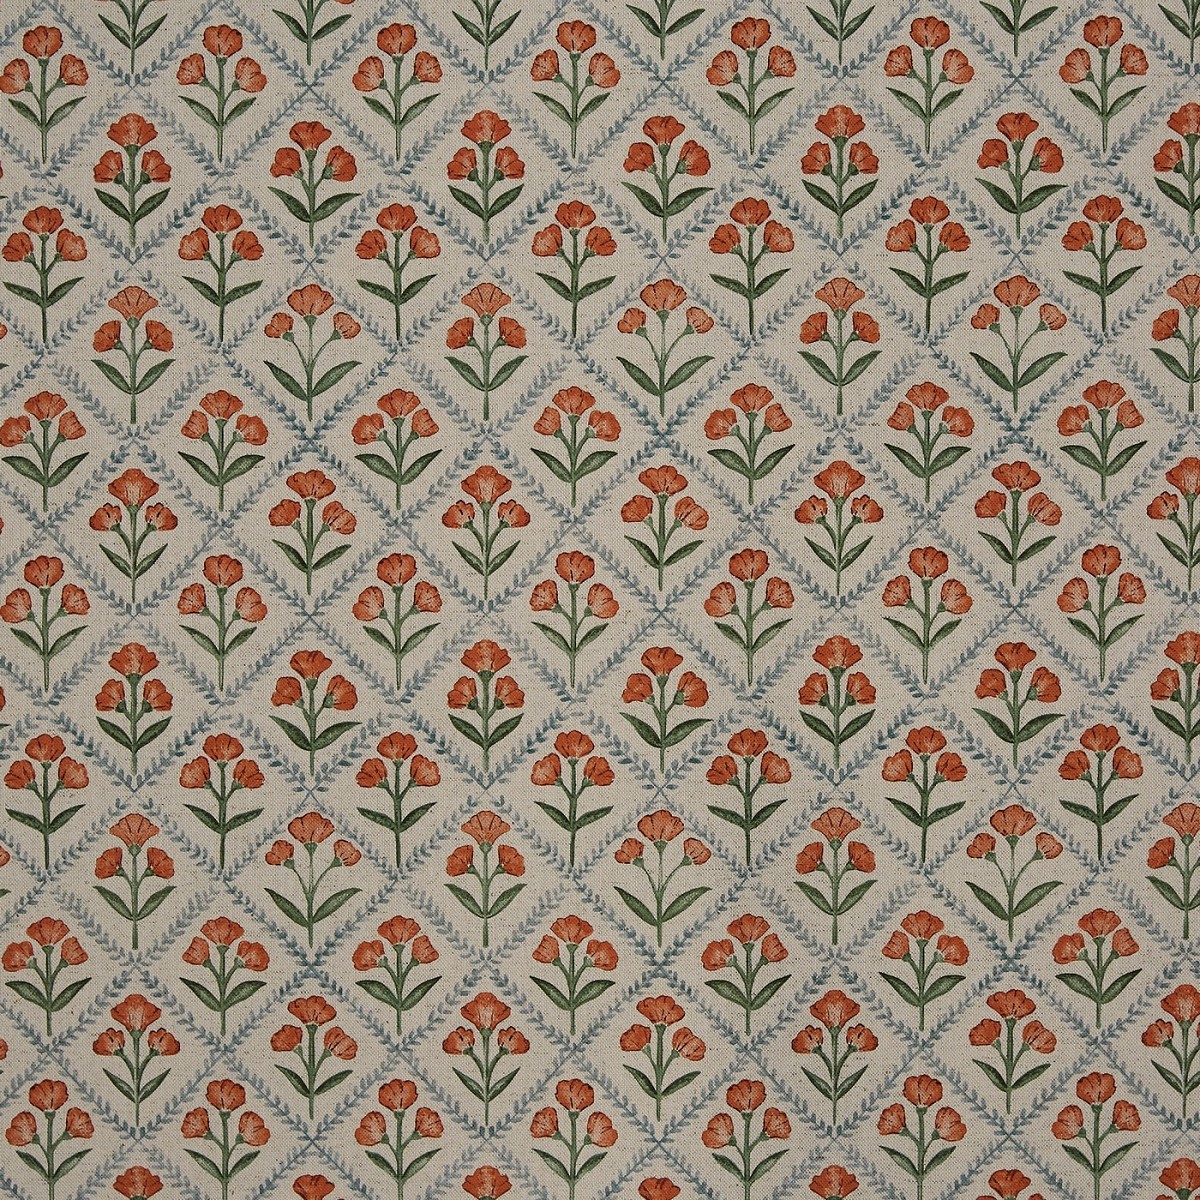 Chatsworth Ginger Fabric by Prestigious Textiles